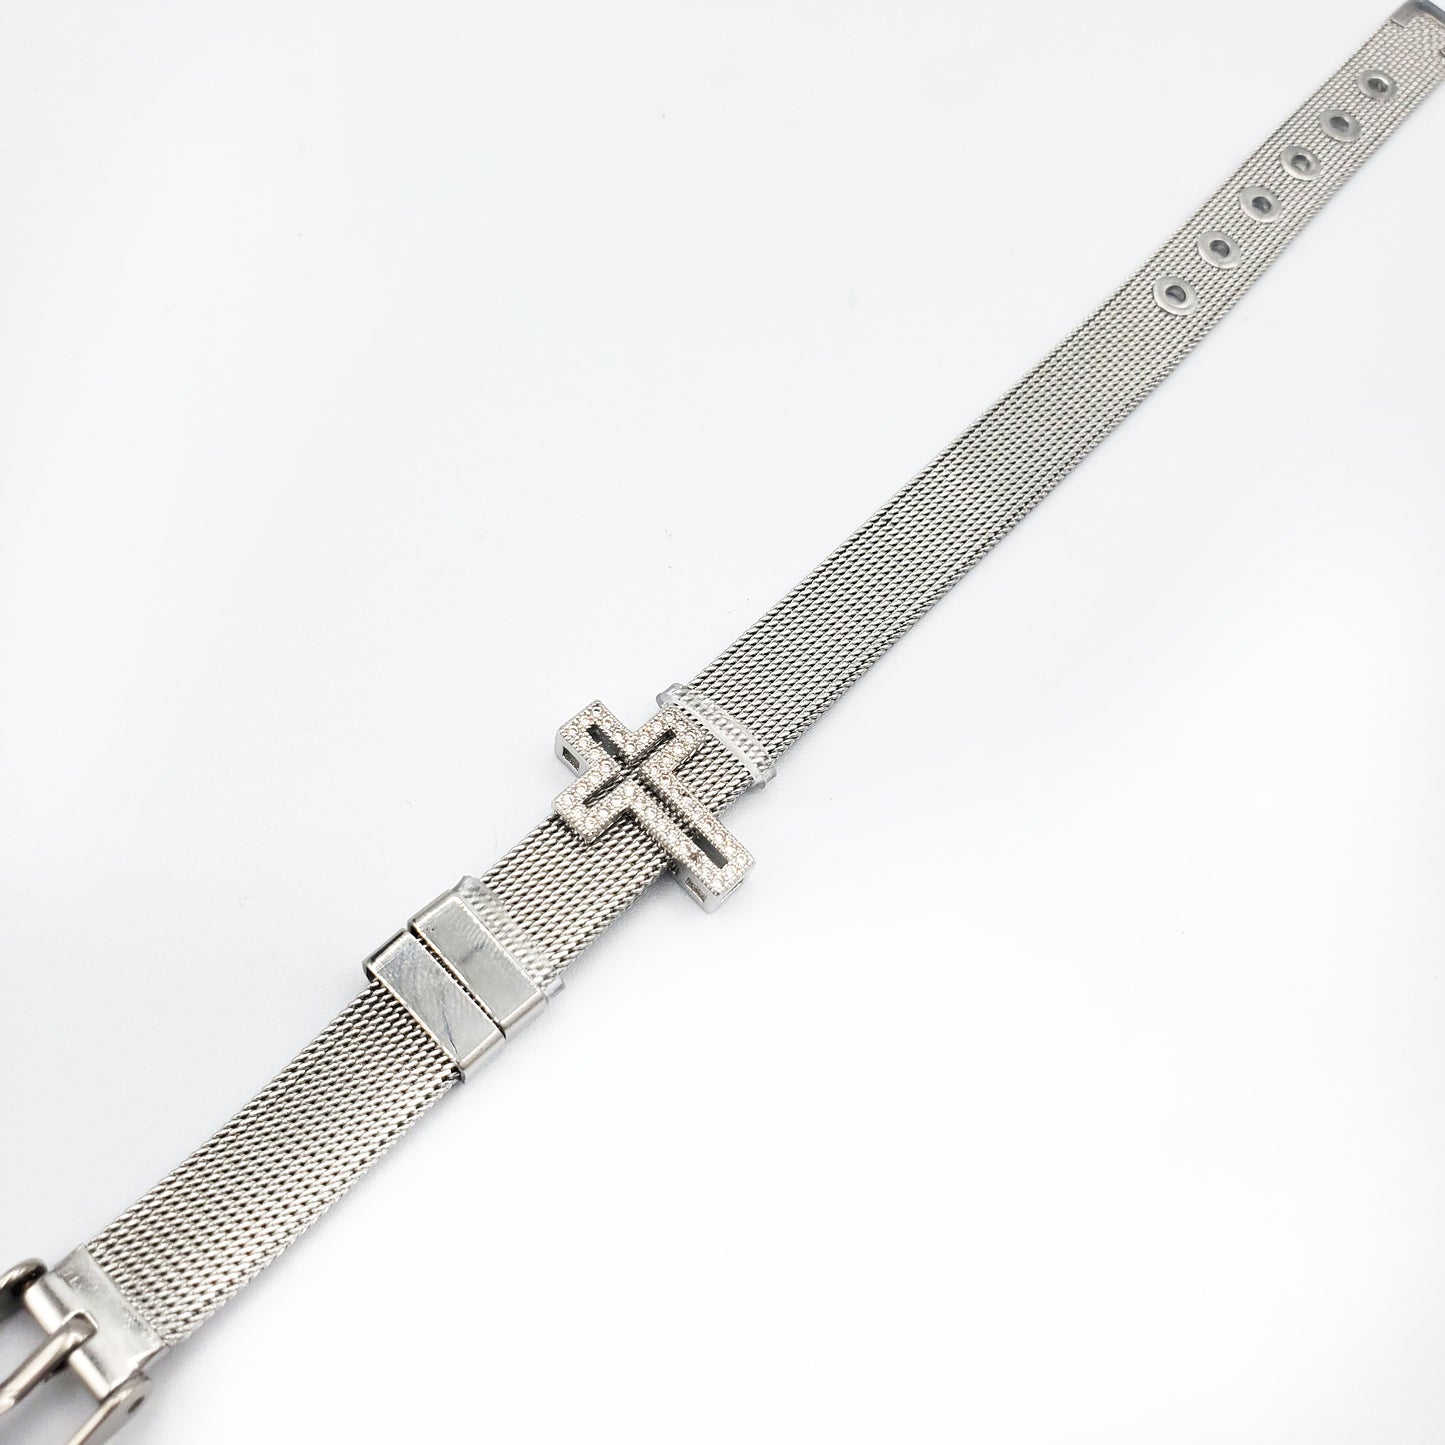 BRS-24 Bracelet/Pulsera Stainless Steel Cross with White Stones